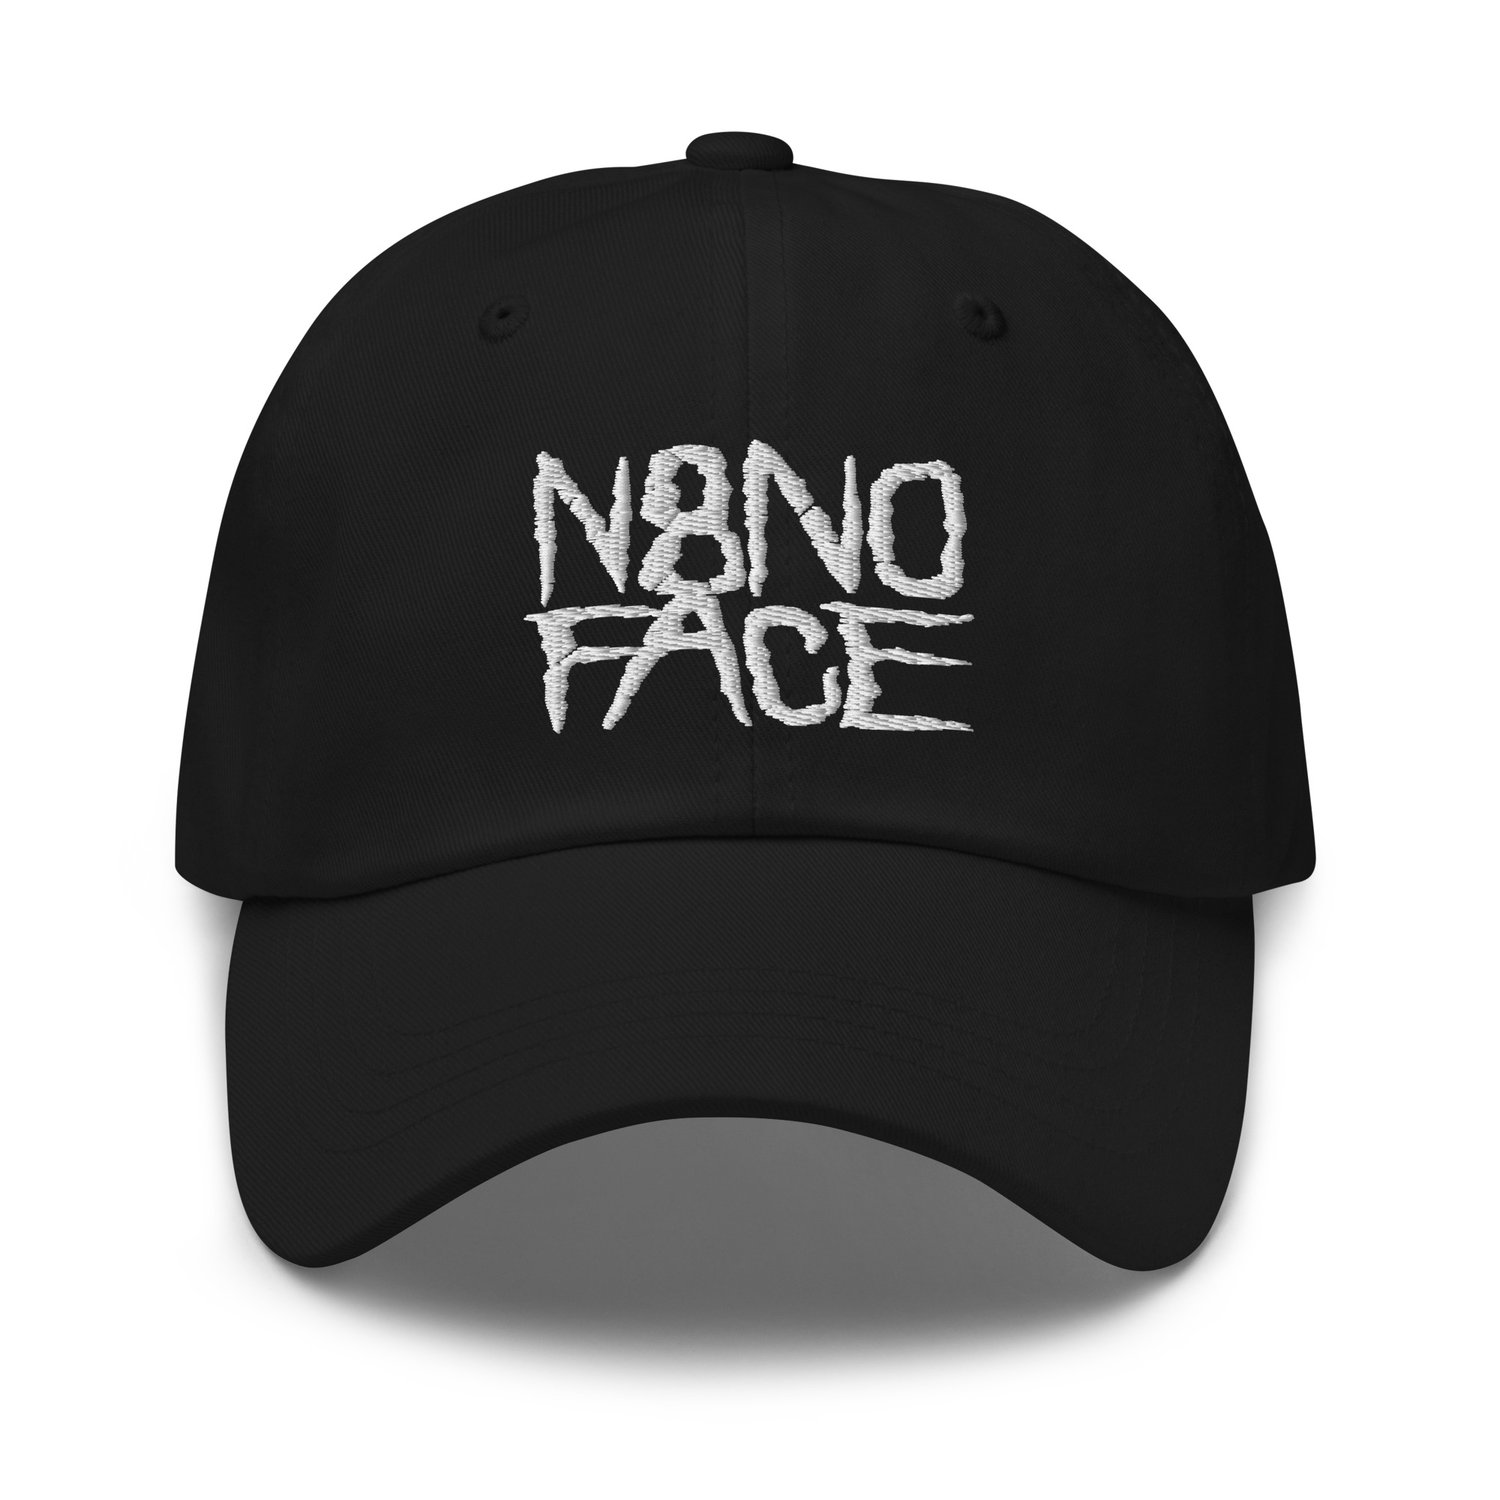 N8NOFACE Stacked Logo Embroidered Dad hat (Black w/ White)